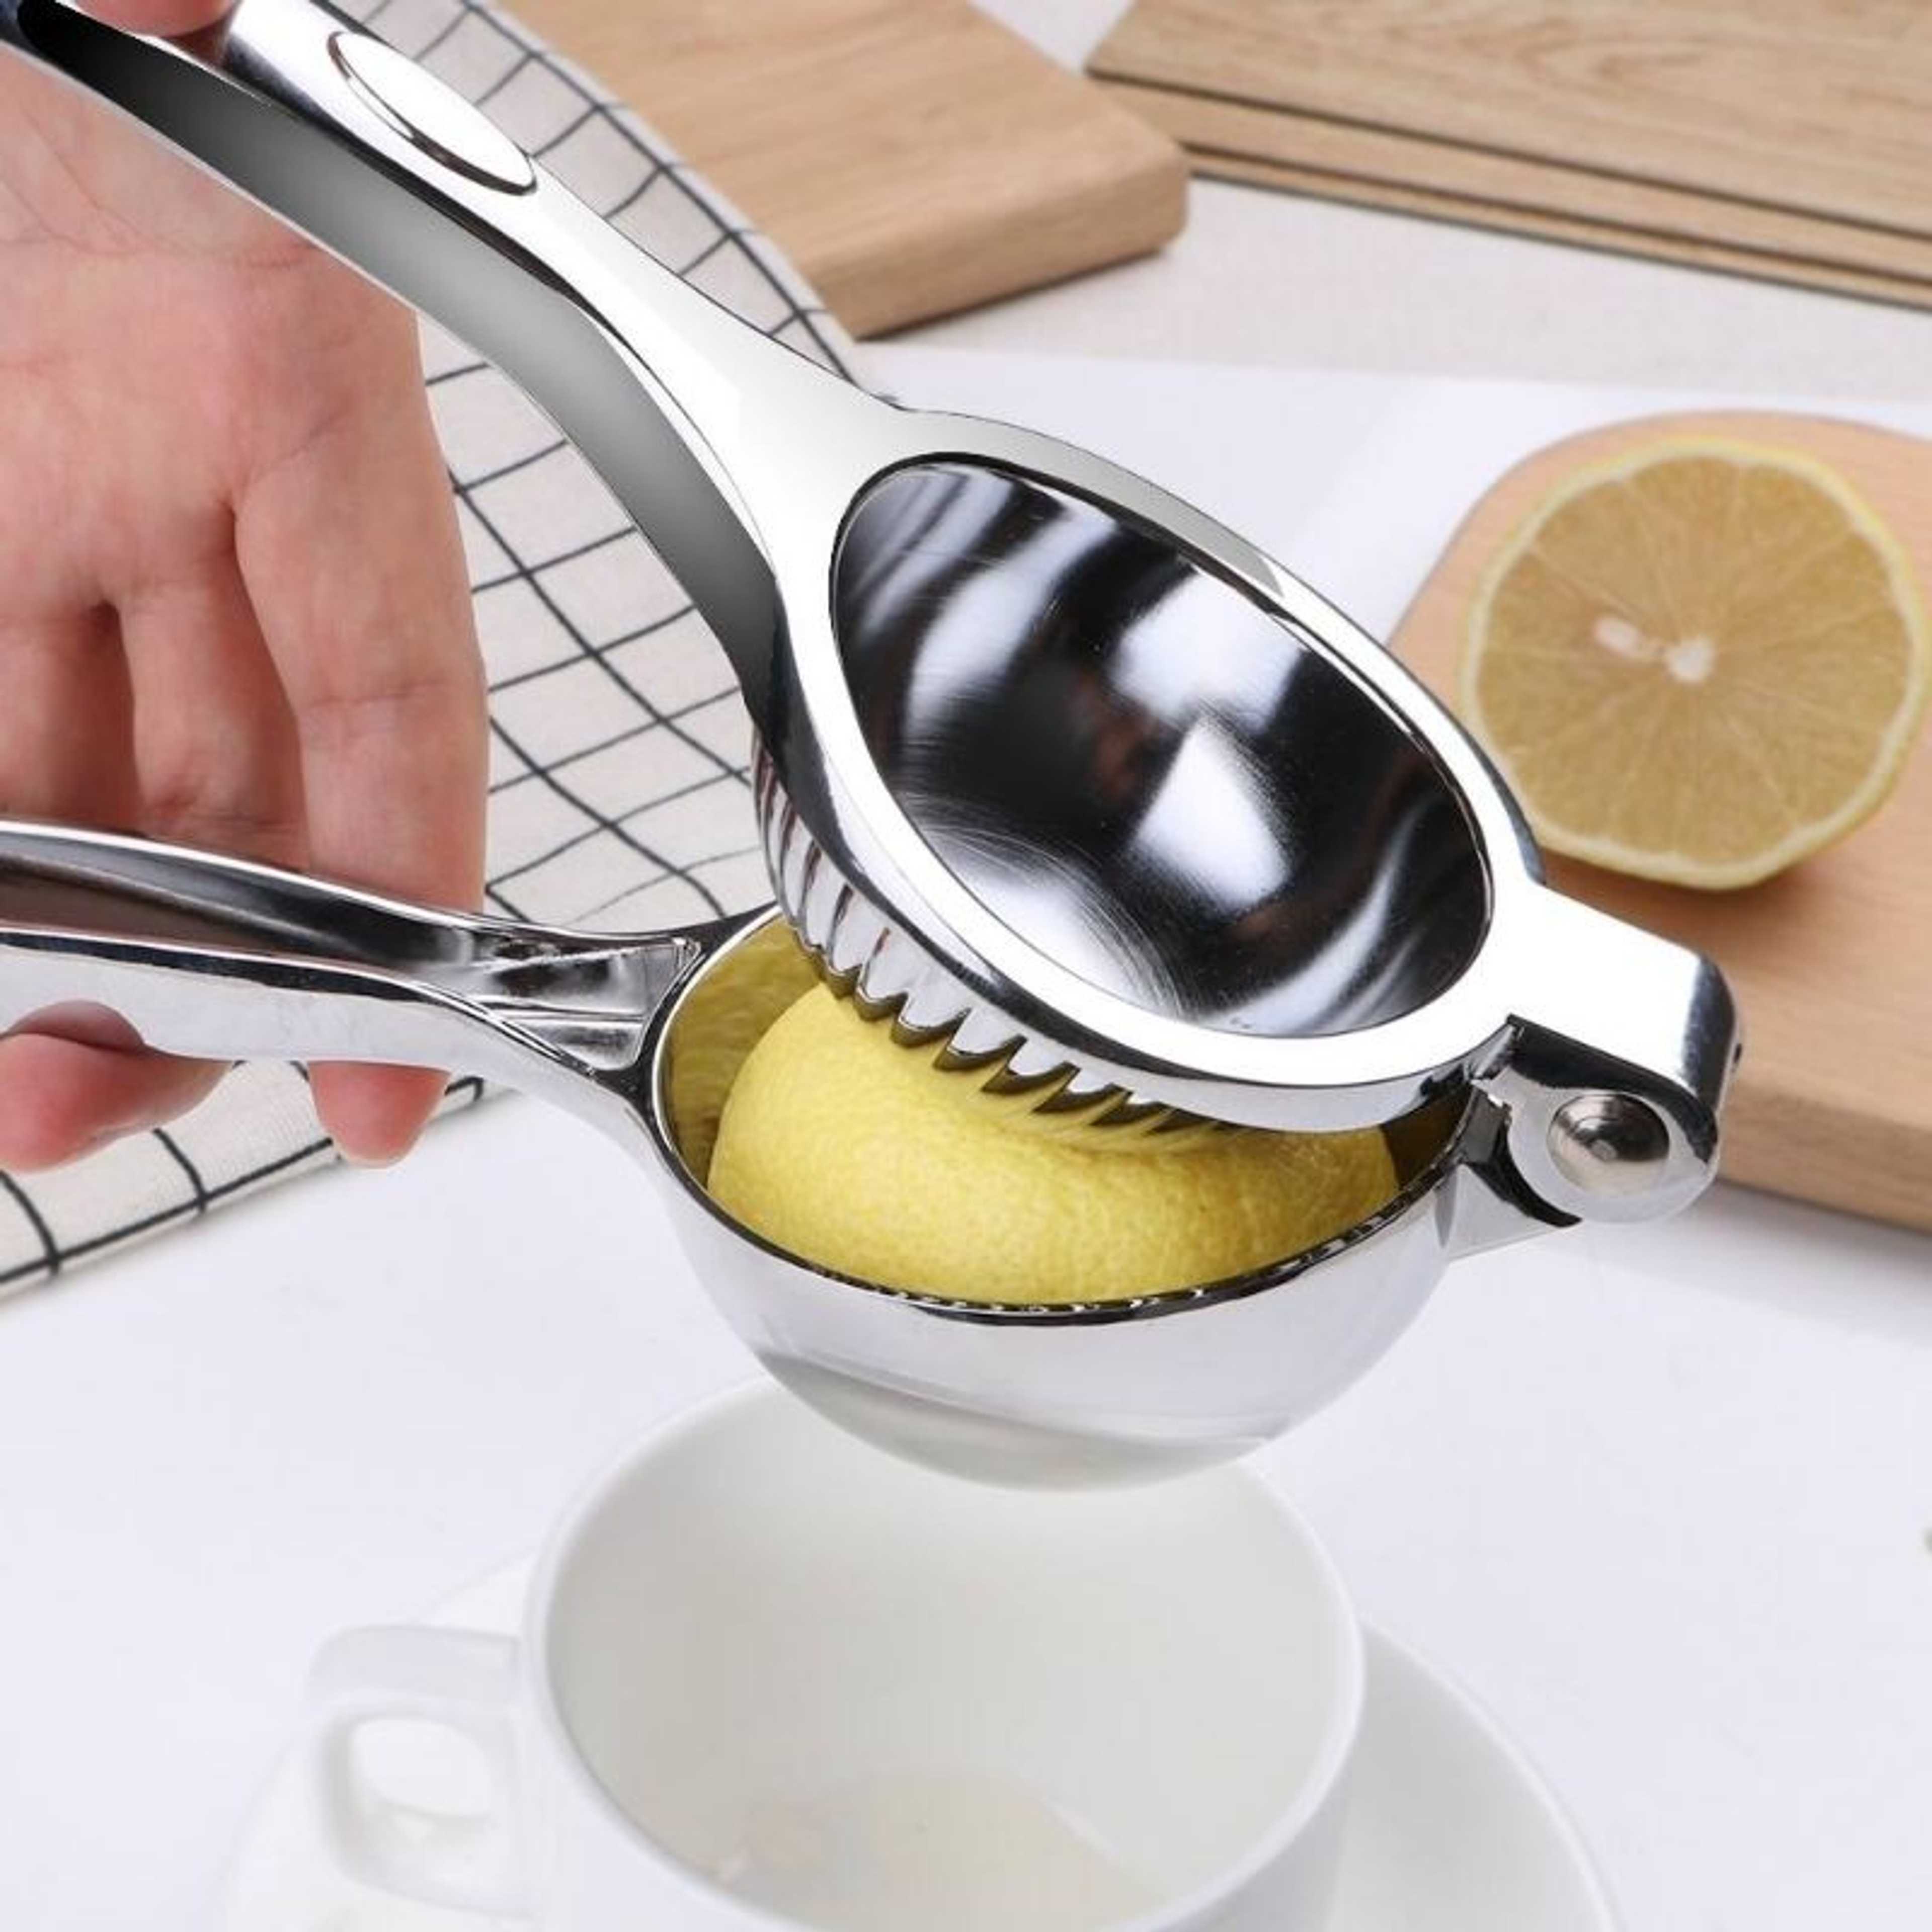 Lemon Squeezer Hand Manual - Lime Hand Juice Lemon Squeezers Press Citrus Press Juicers Squeezer, Premium Quality Lime Lemon Squeezer, Manual Citrus Press Juicer Heavy Stainless Steel